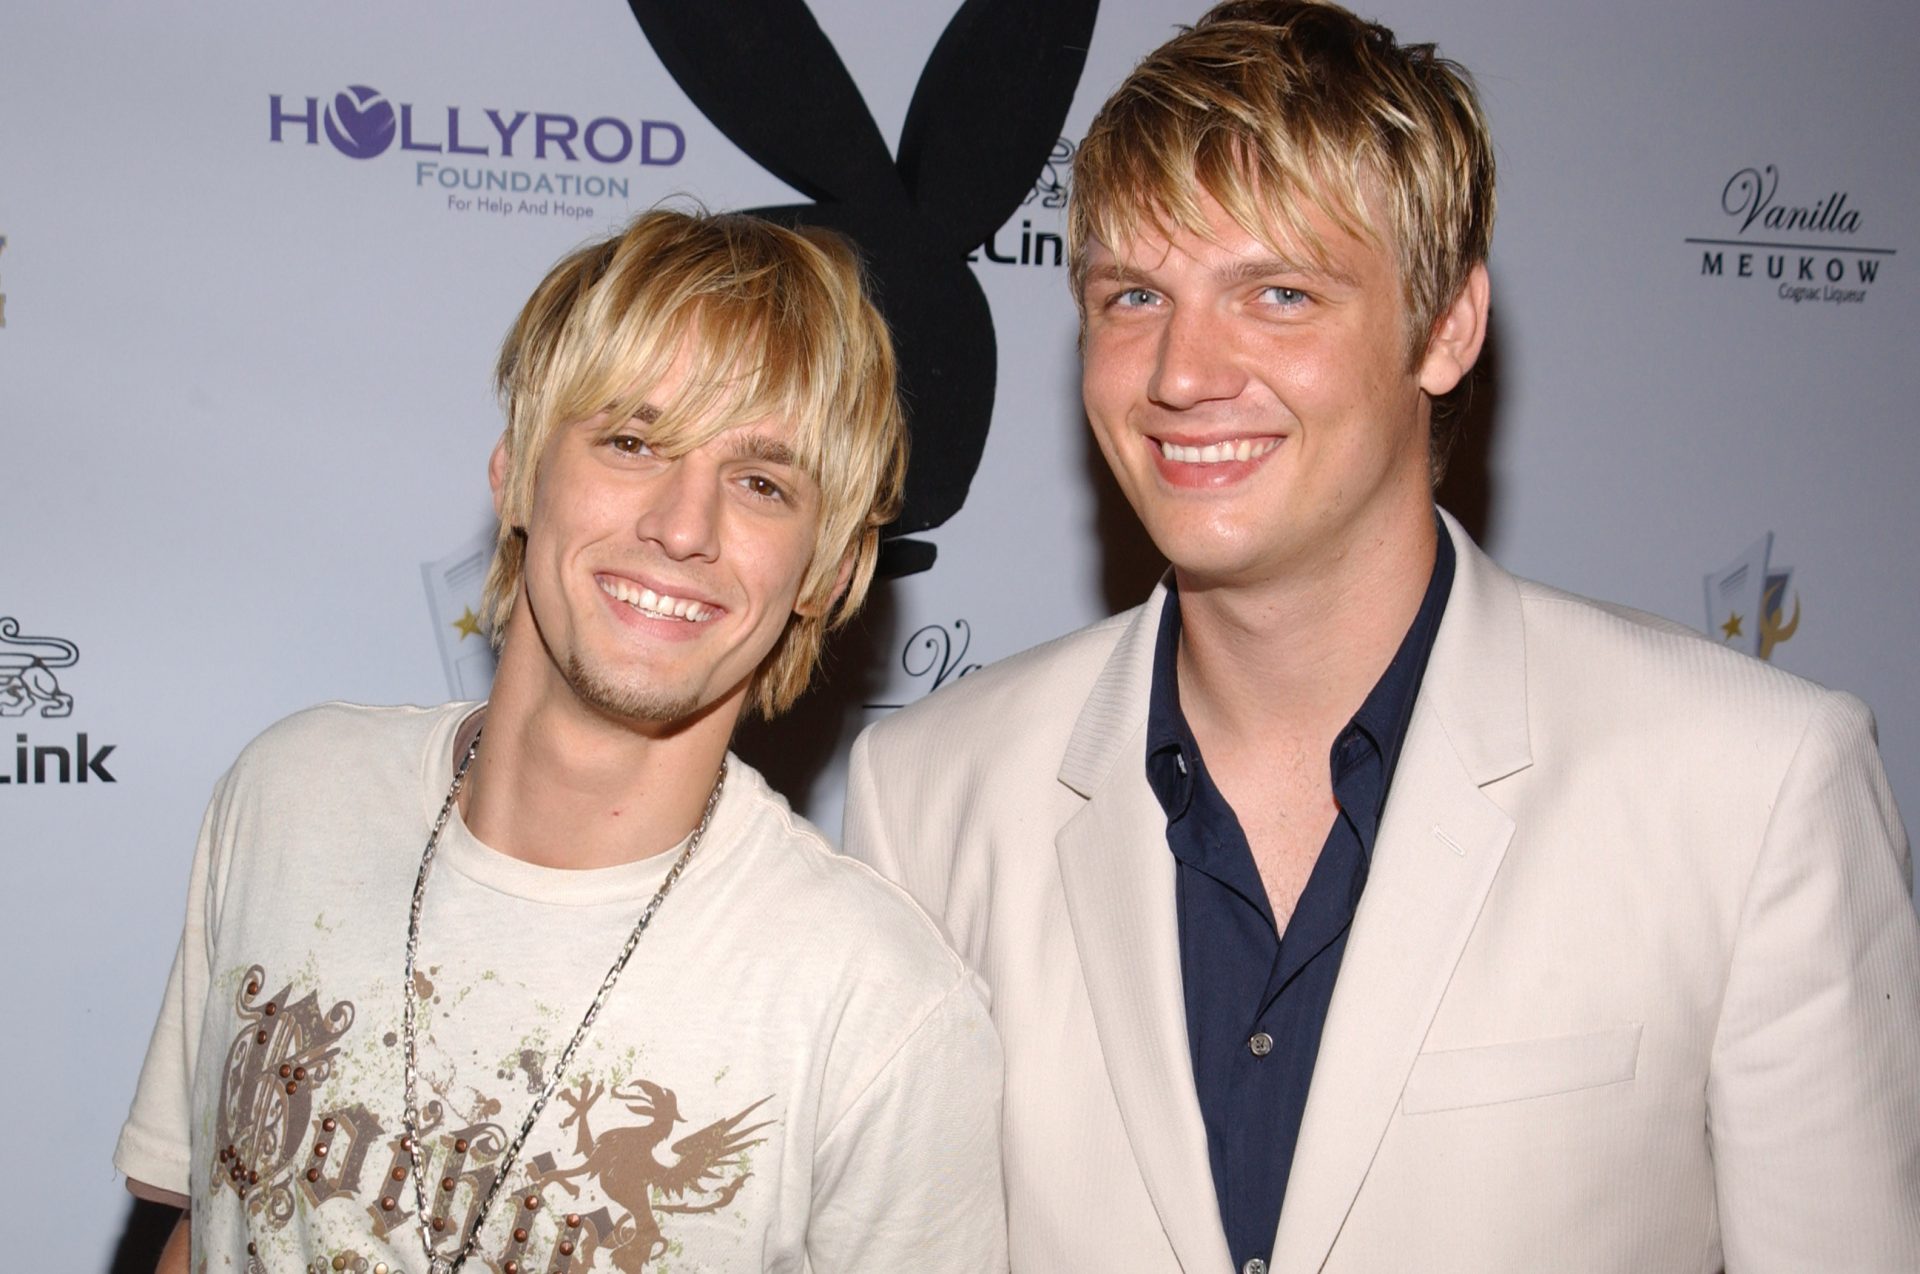 Nick Carter Bursts Into Tears As Backstreet Boys Honor Late Brother Aaron Carter At Concert (Video)